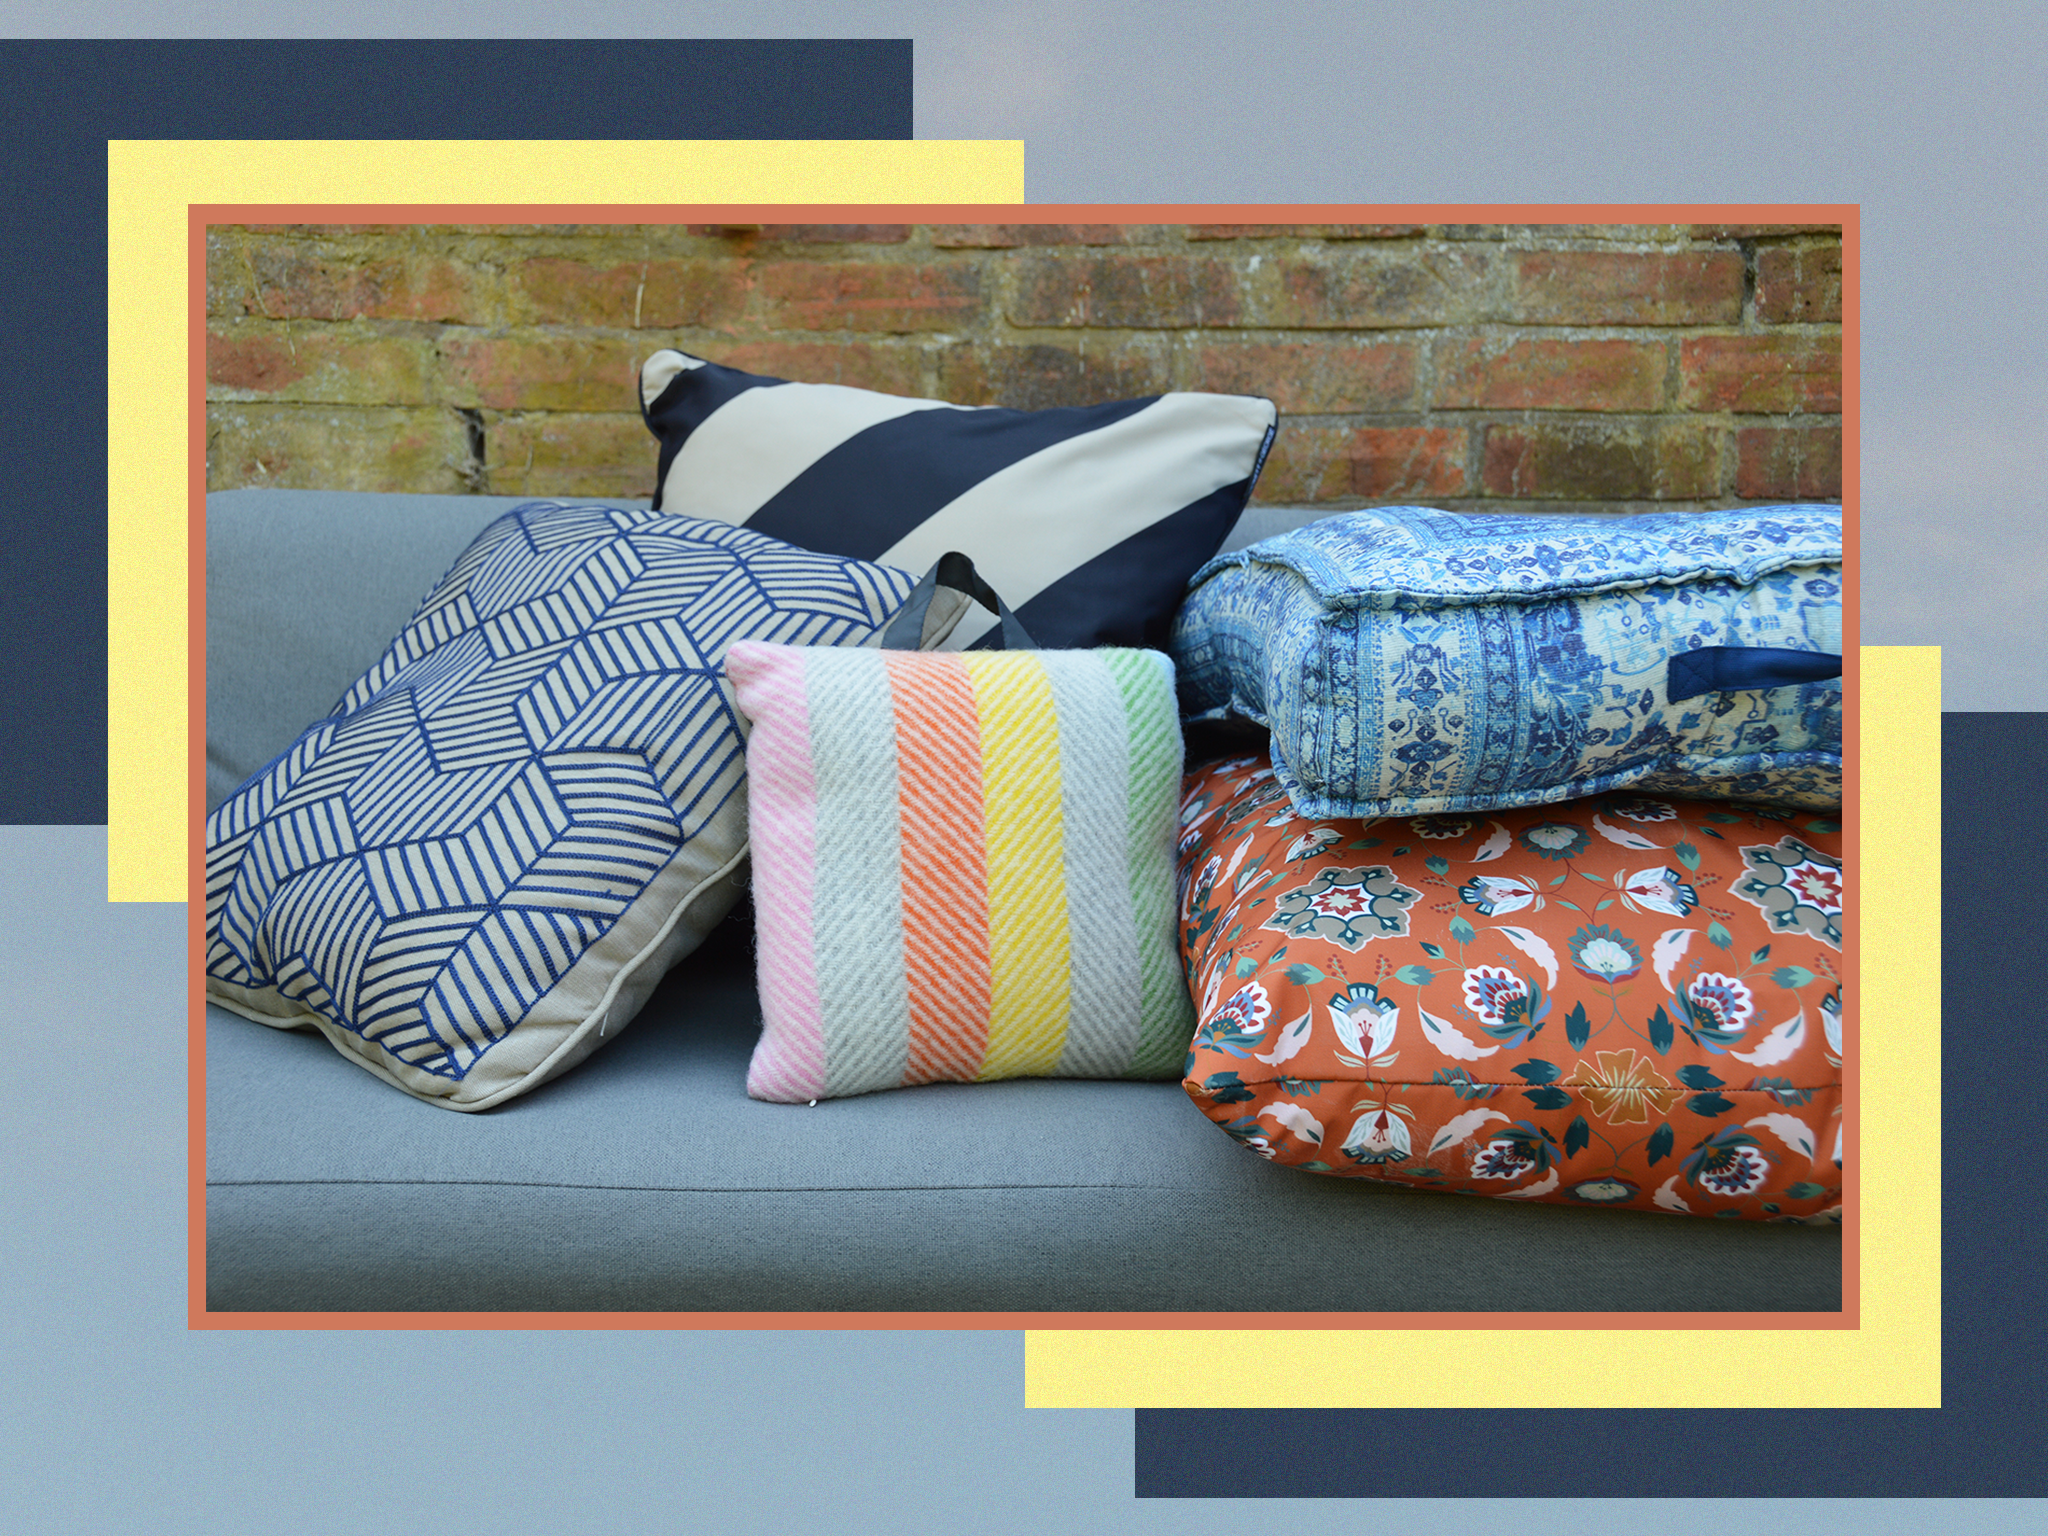 When it comes to outdoor cushions, comfort is key